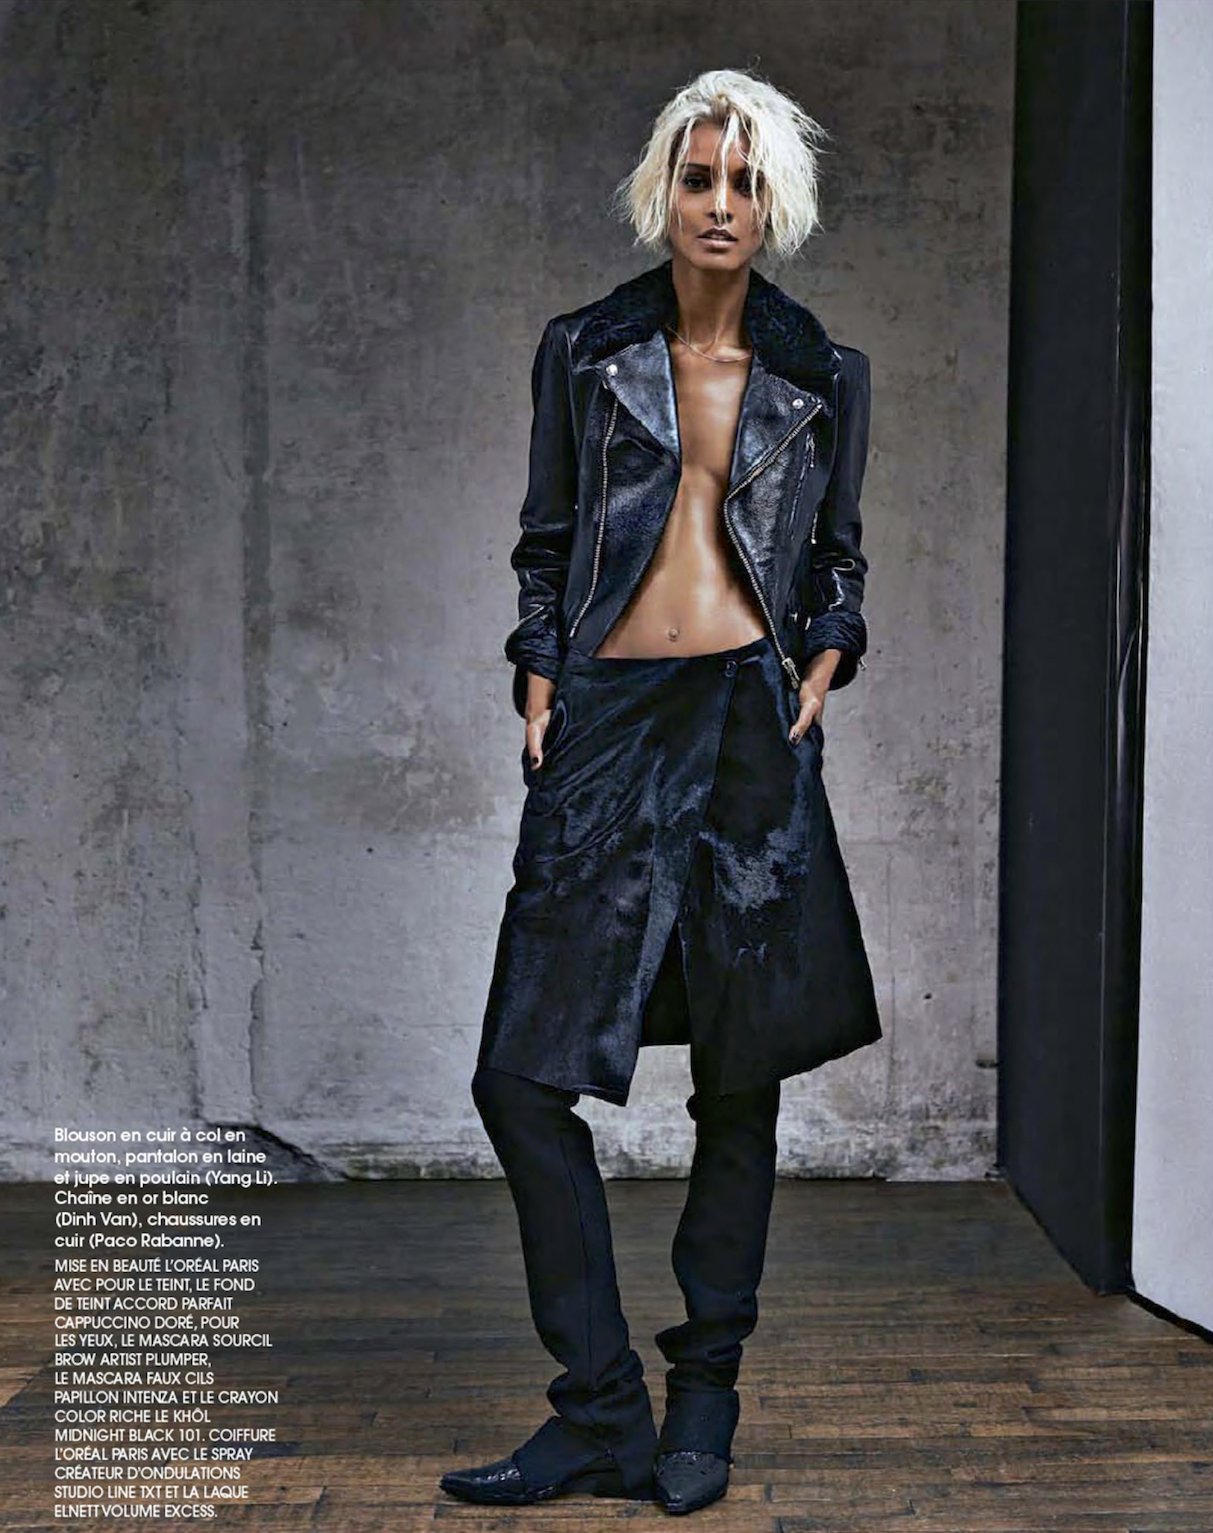 Liya-Kebede-by-Tziano-Magni-for-Marie-Claire-France-00010.jpeg